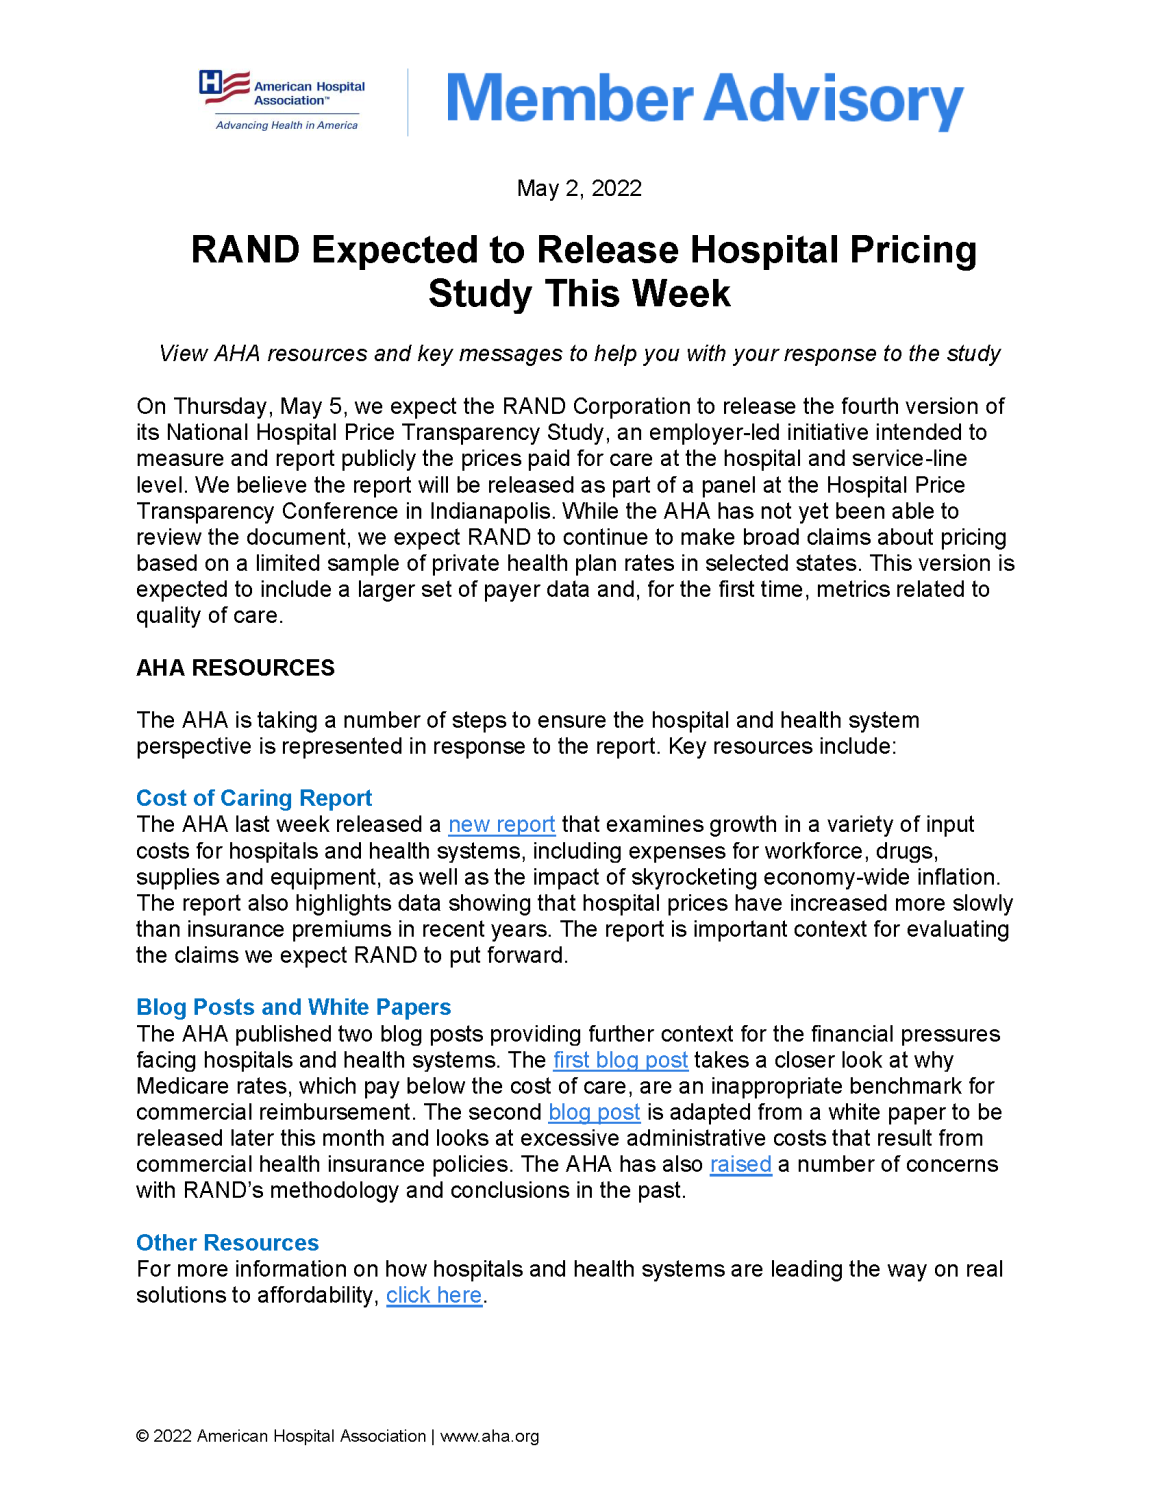 Member Advisory: RAND Expected to Release Hospital Pricing Study This Week page 1.